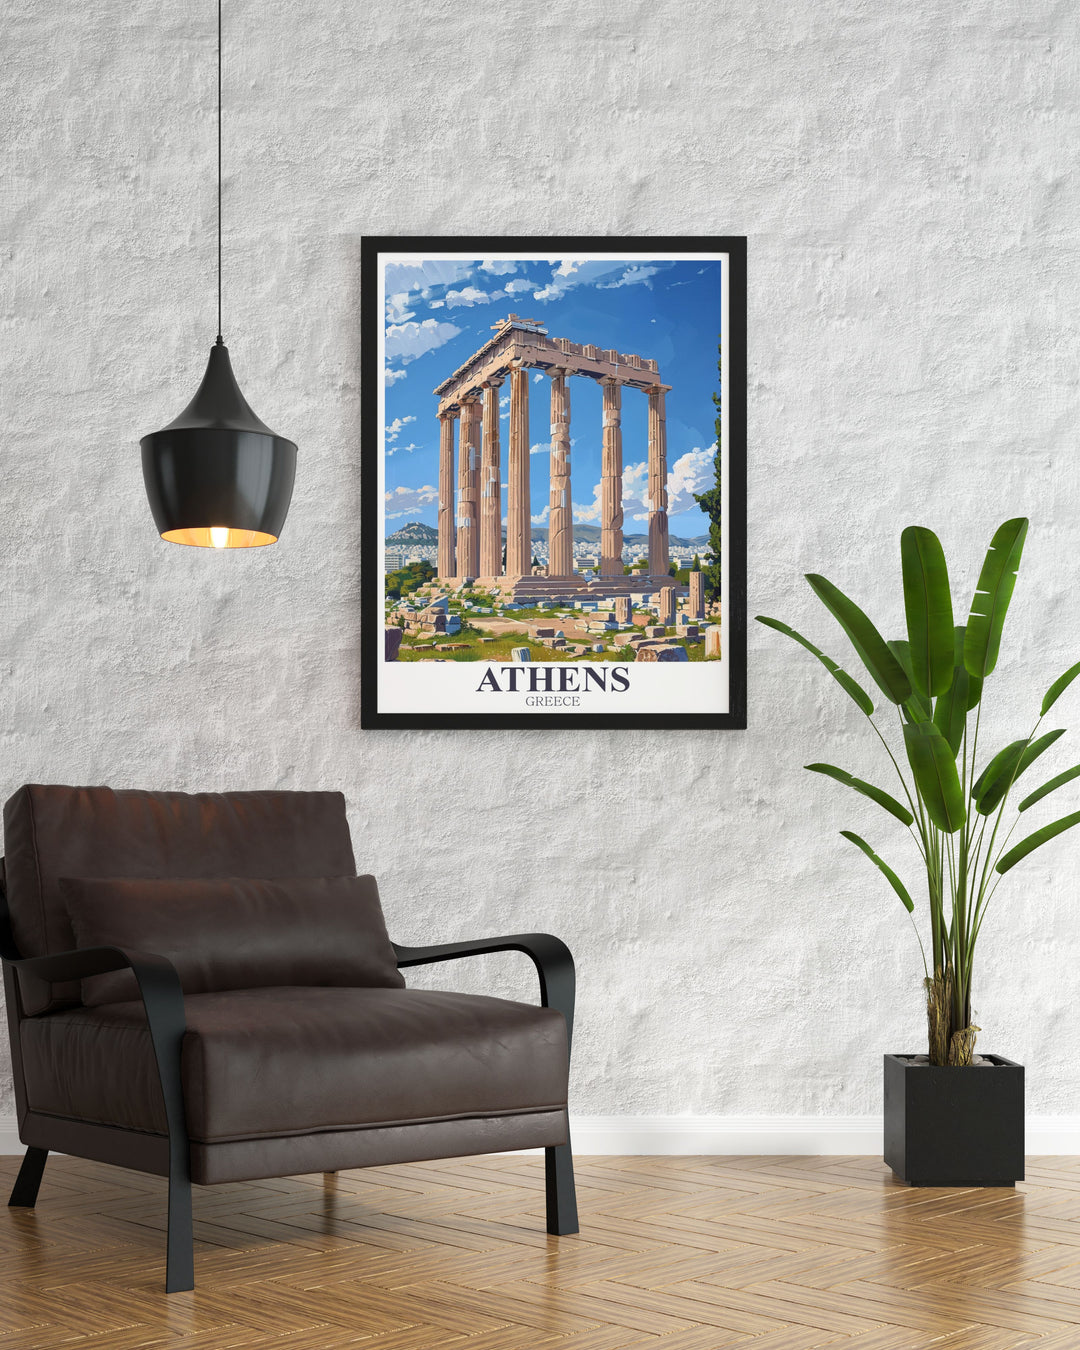 Athens Greece Print featuring Templeof Olympian Zeus offering a glimpse into one of Athens most significant historical landmarks ideal for wall art and gifts celebrating Greek heritage and beauty